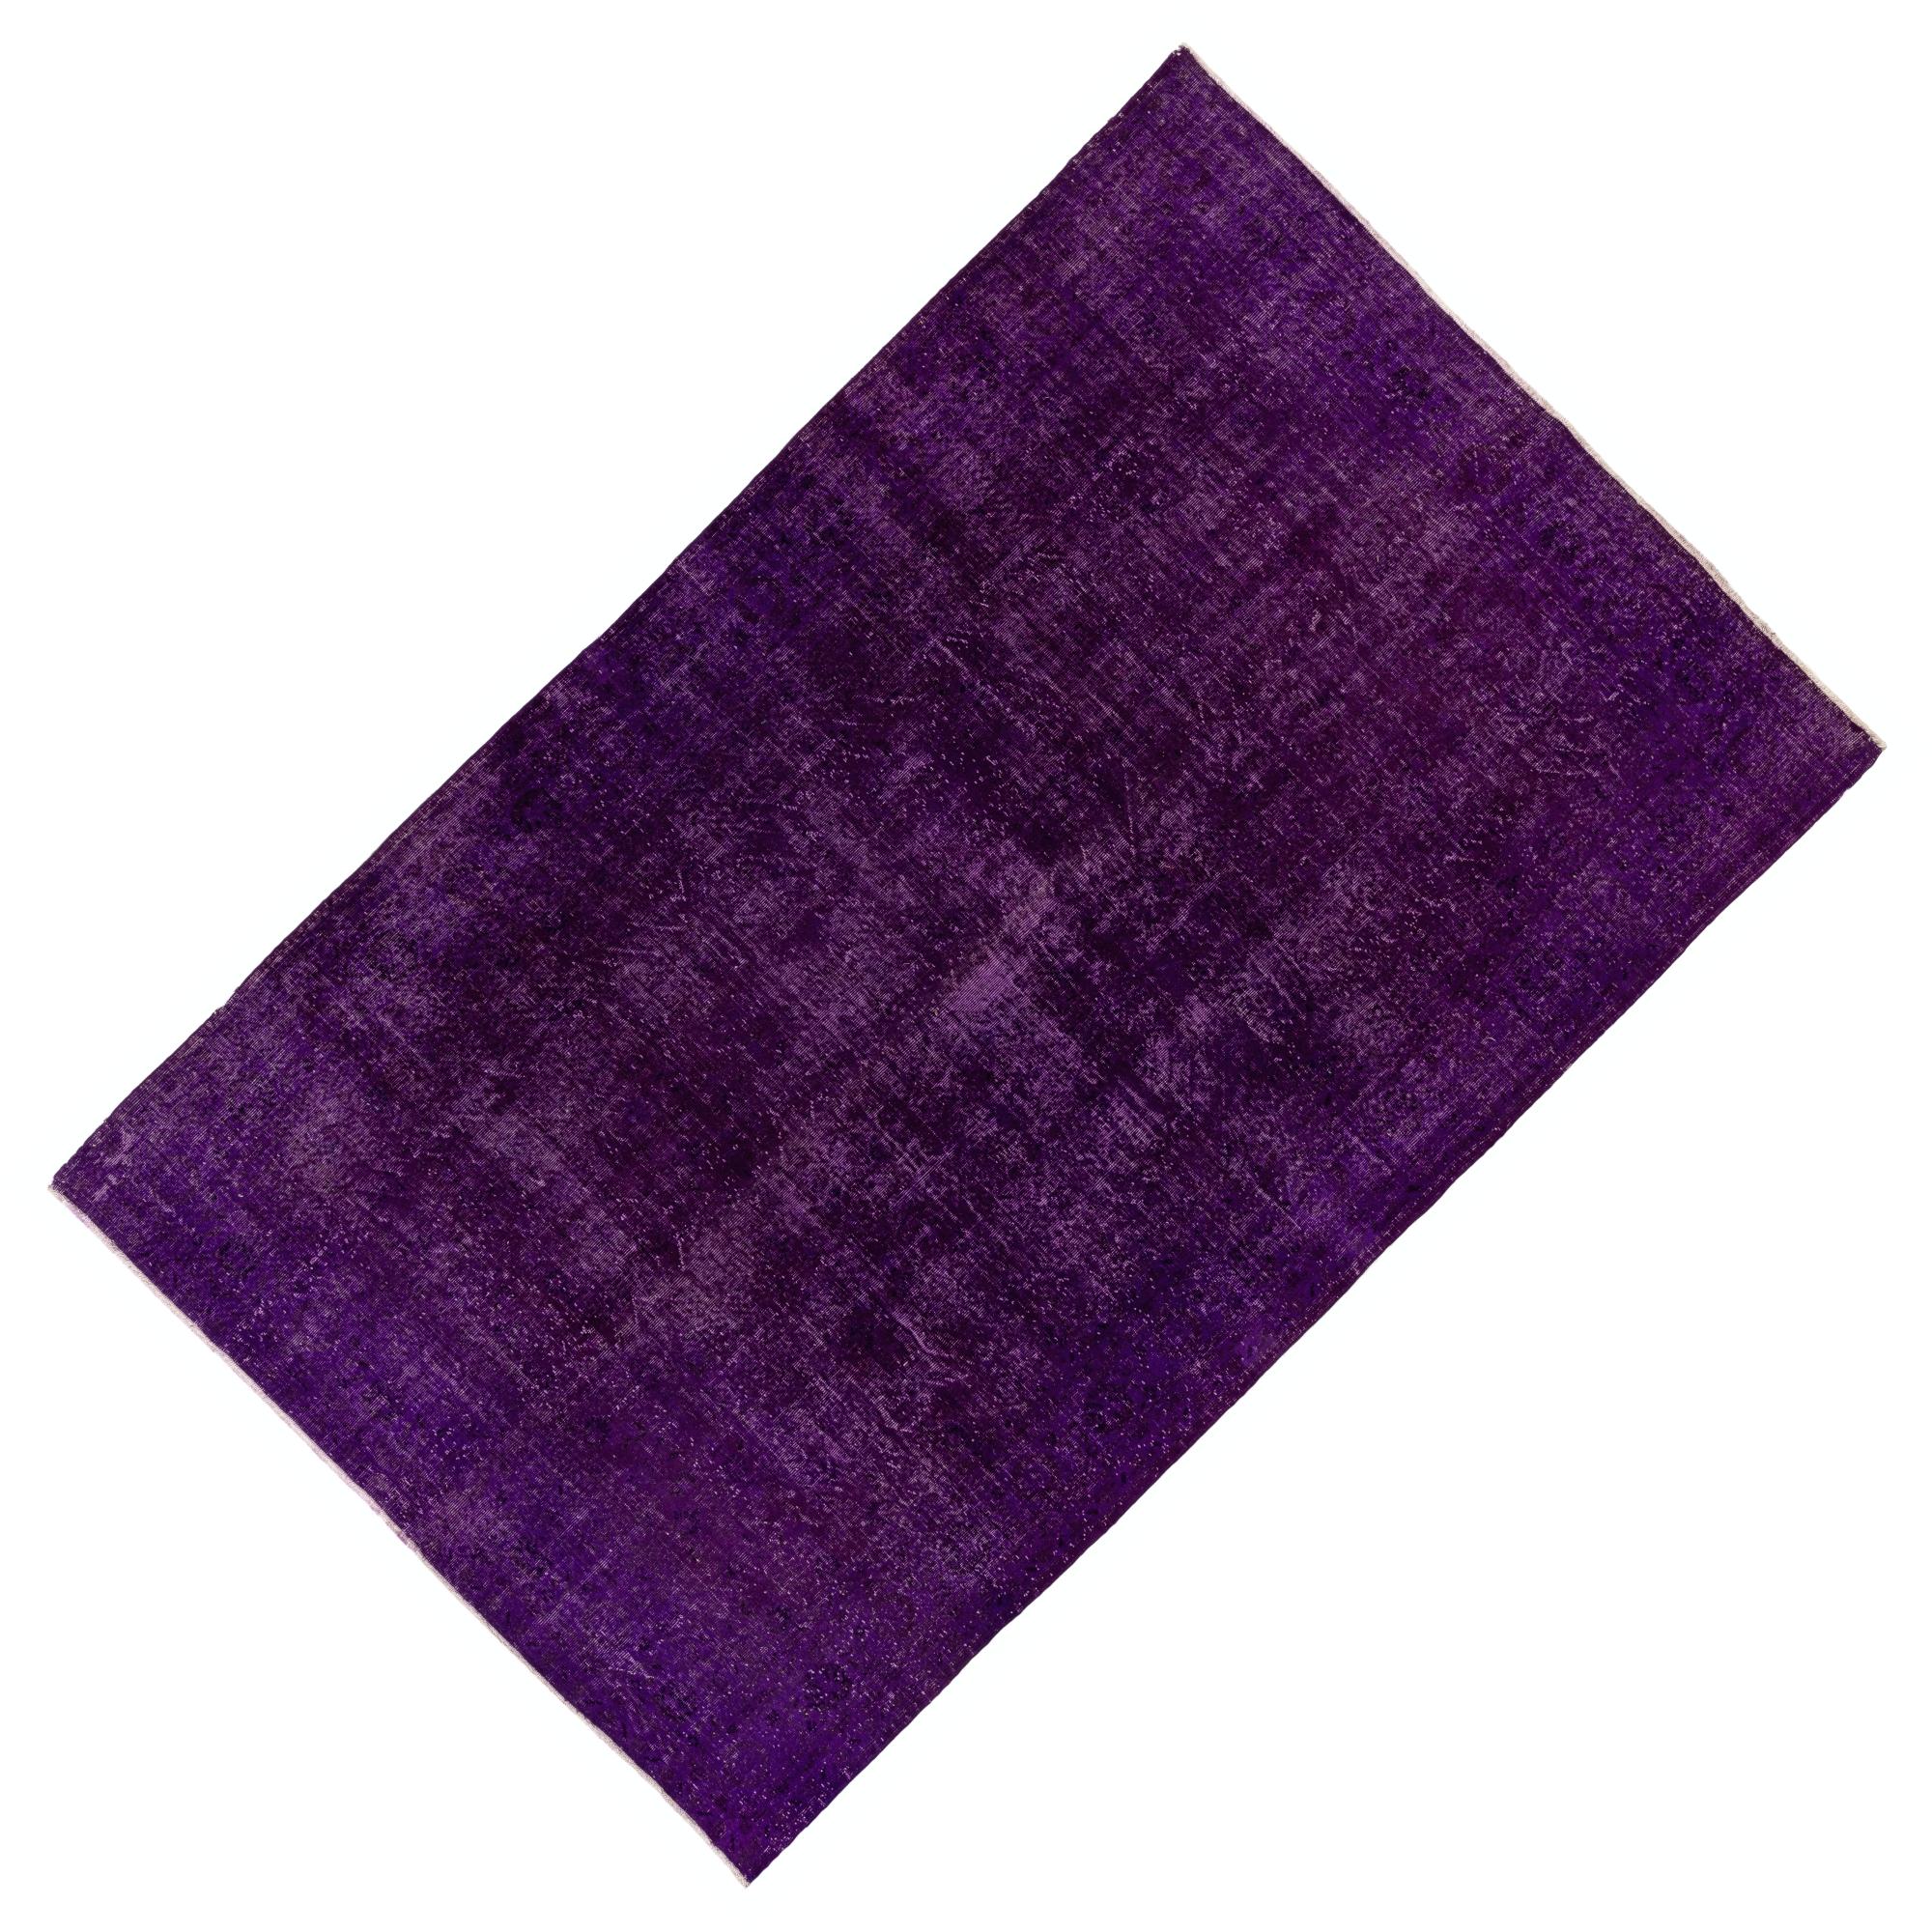 Hand-Woven 6.6x10 Ft Solid Purple Color Over-Dyed Vintage Handmade Rug, Wool Turkish Carpet